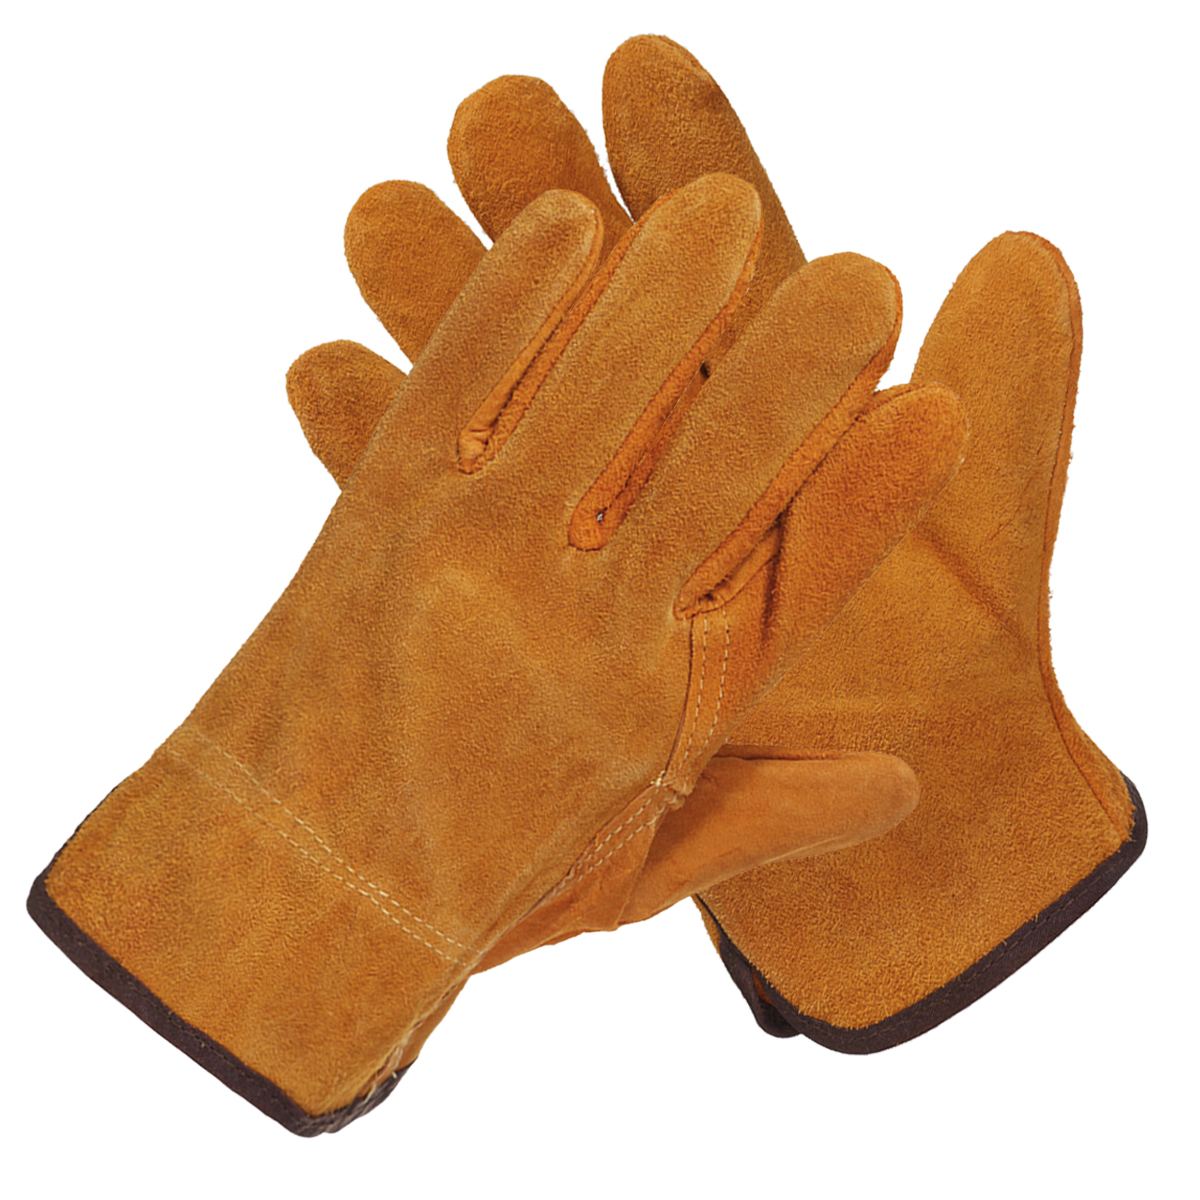 Find Garden Gardening Welder Gloves Men Women Thorn Proof Leather Work Gloves Yellow for Sale on Gipsybee.com with cryptocurrencies